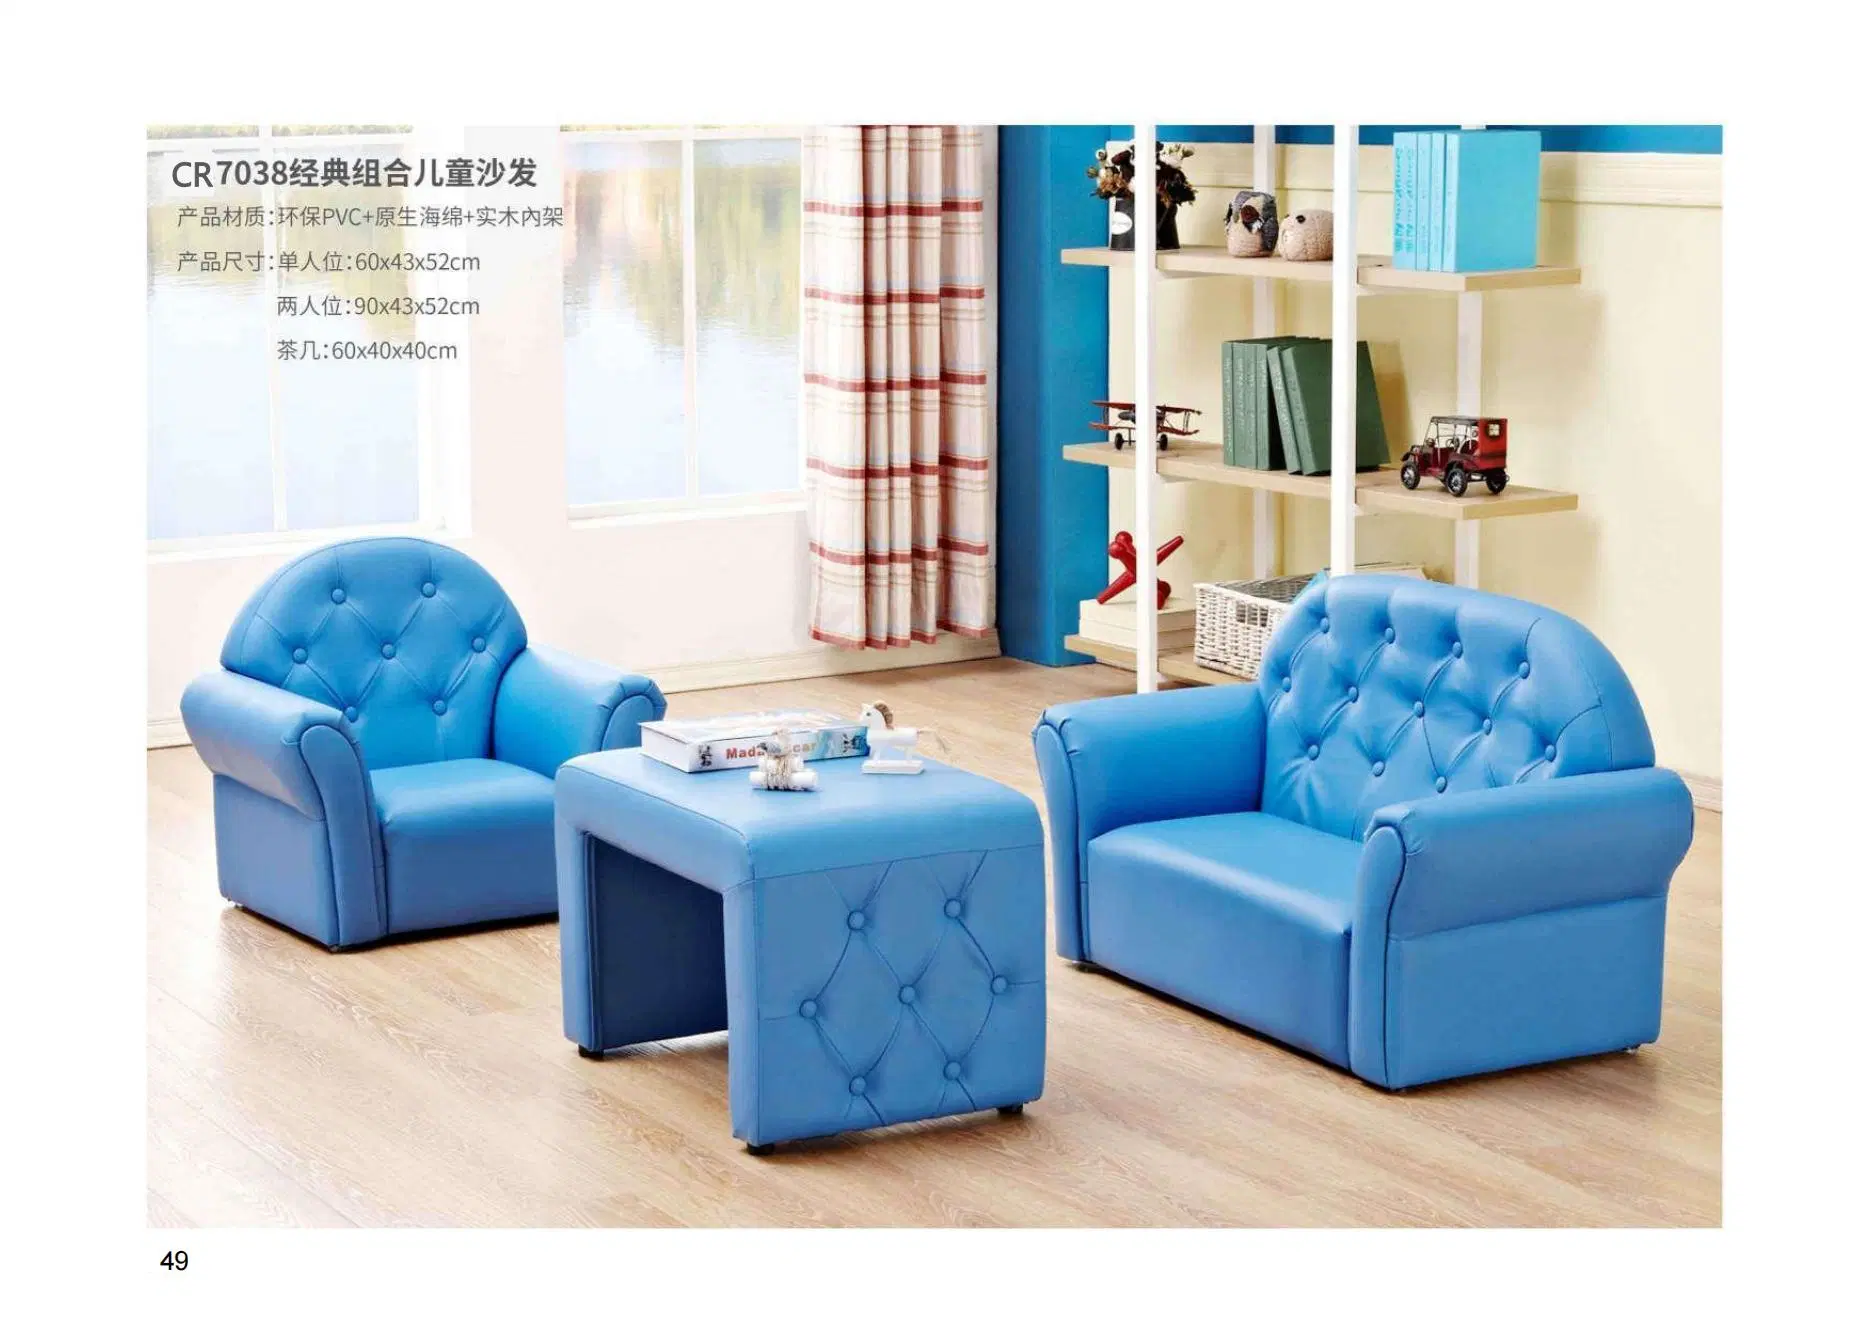 Classic Combination Sofa, Day Care Center Sofa, Living and Reading Room Sofa, Baby and Children Room Armchair, Kindergarten and Preschool Sofa